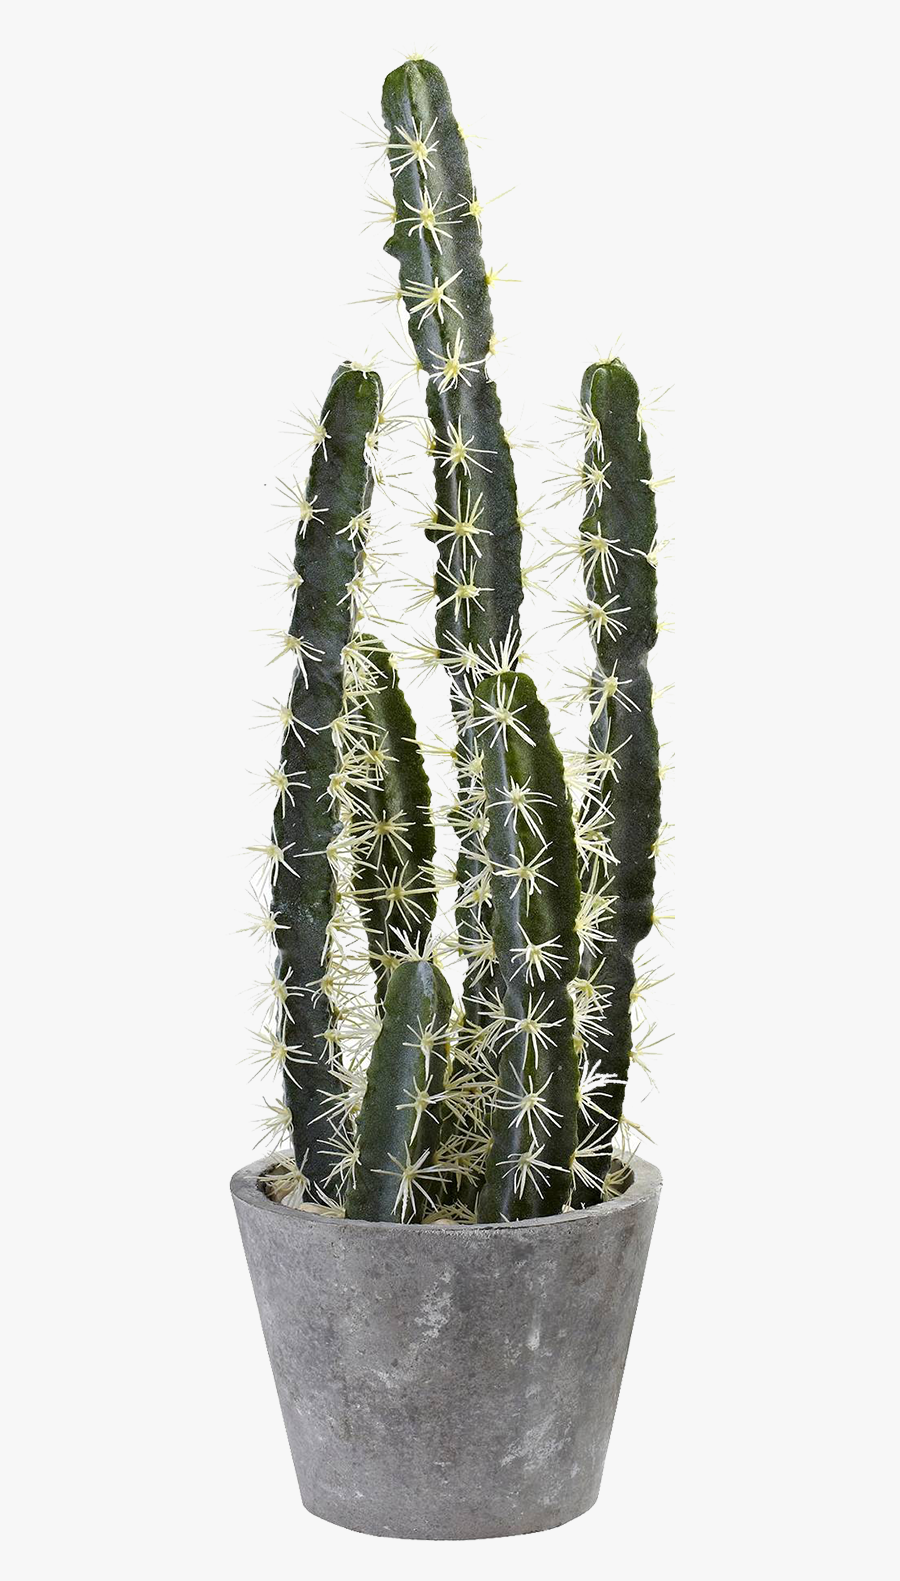 Cactus Png Potted - Cactus In Pot Png, Transparent Clipart